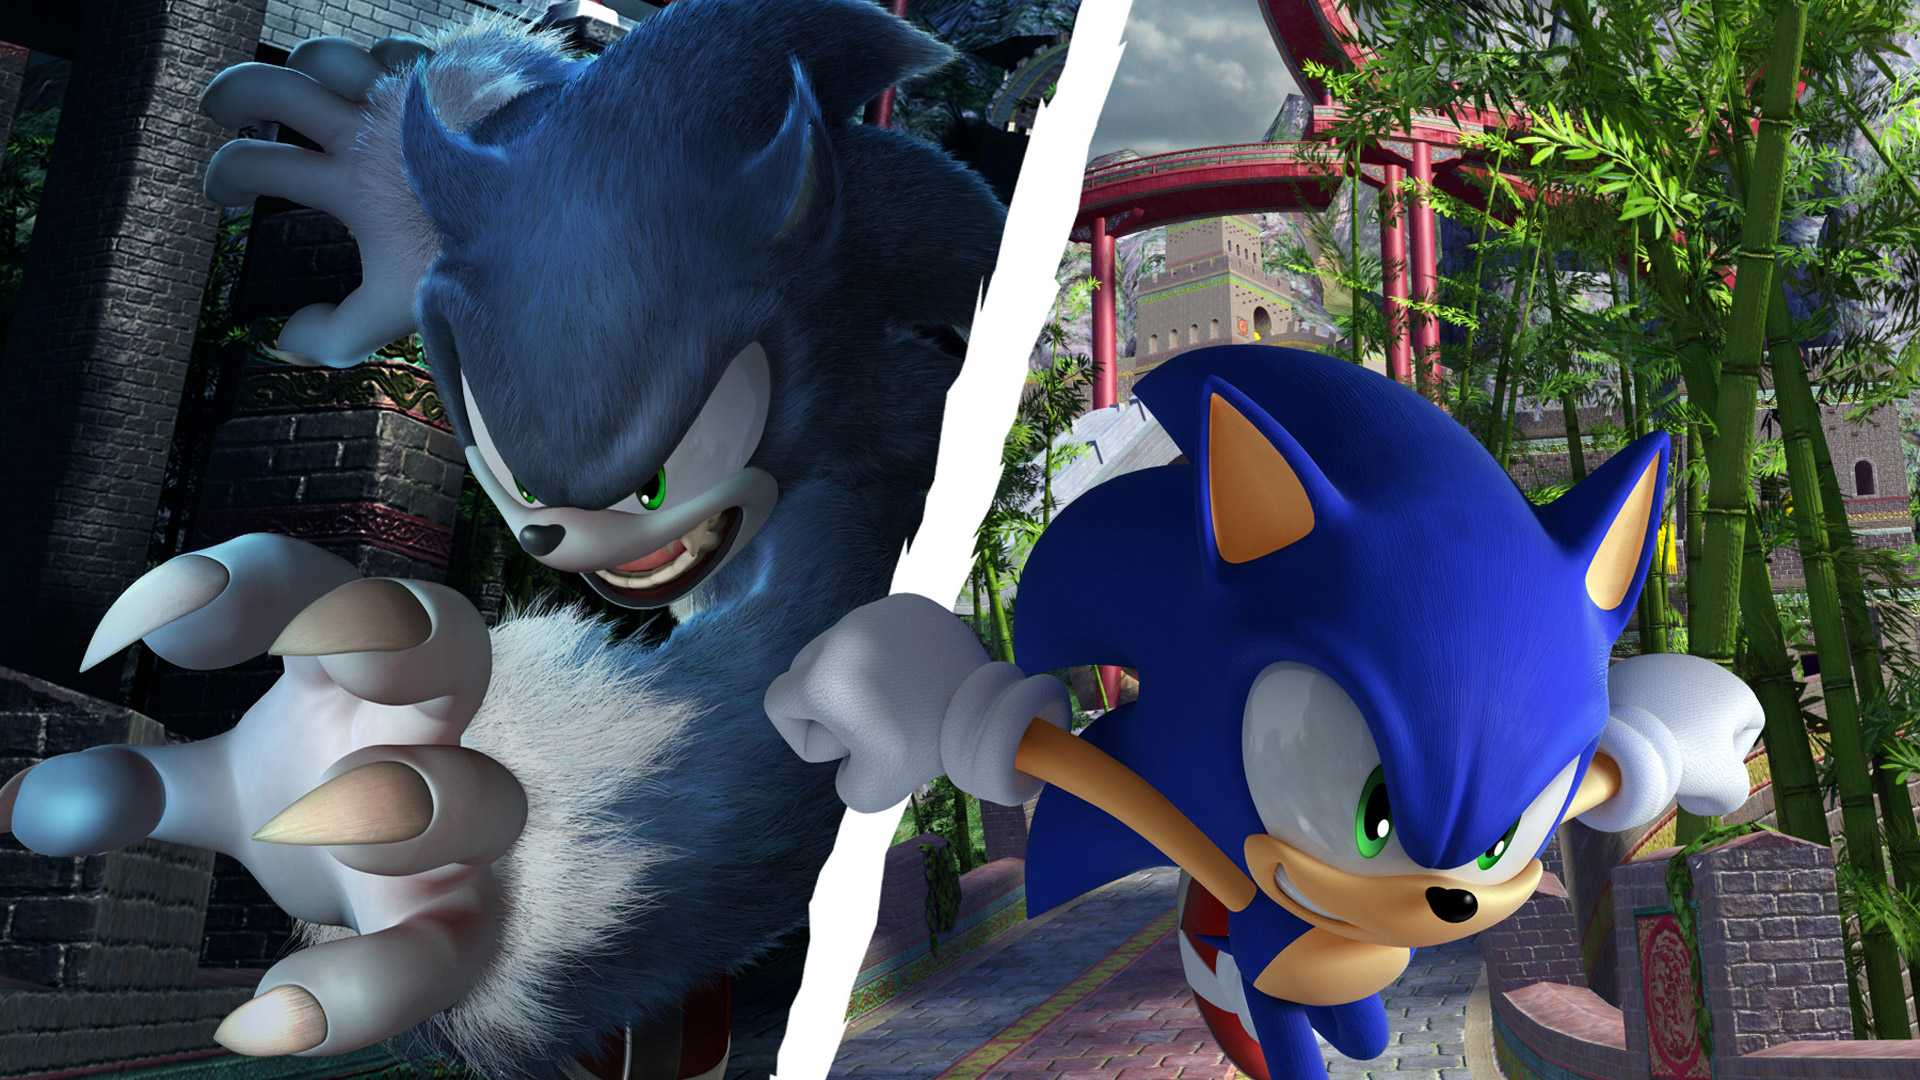 sonic unleashed demo pc